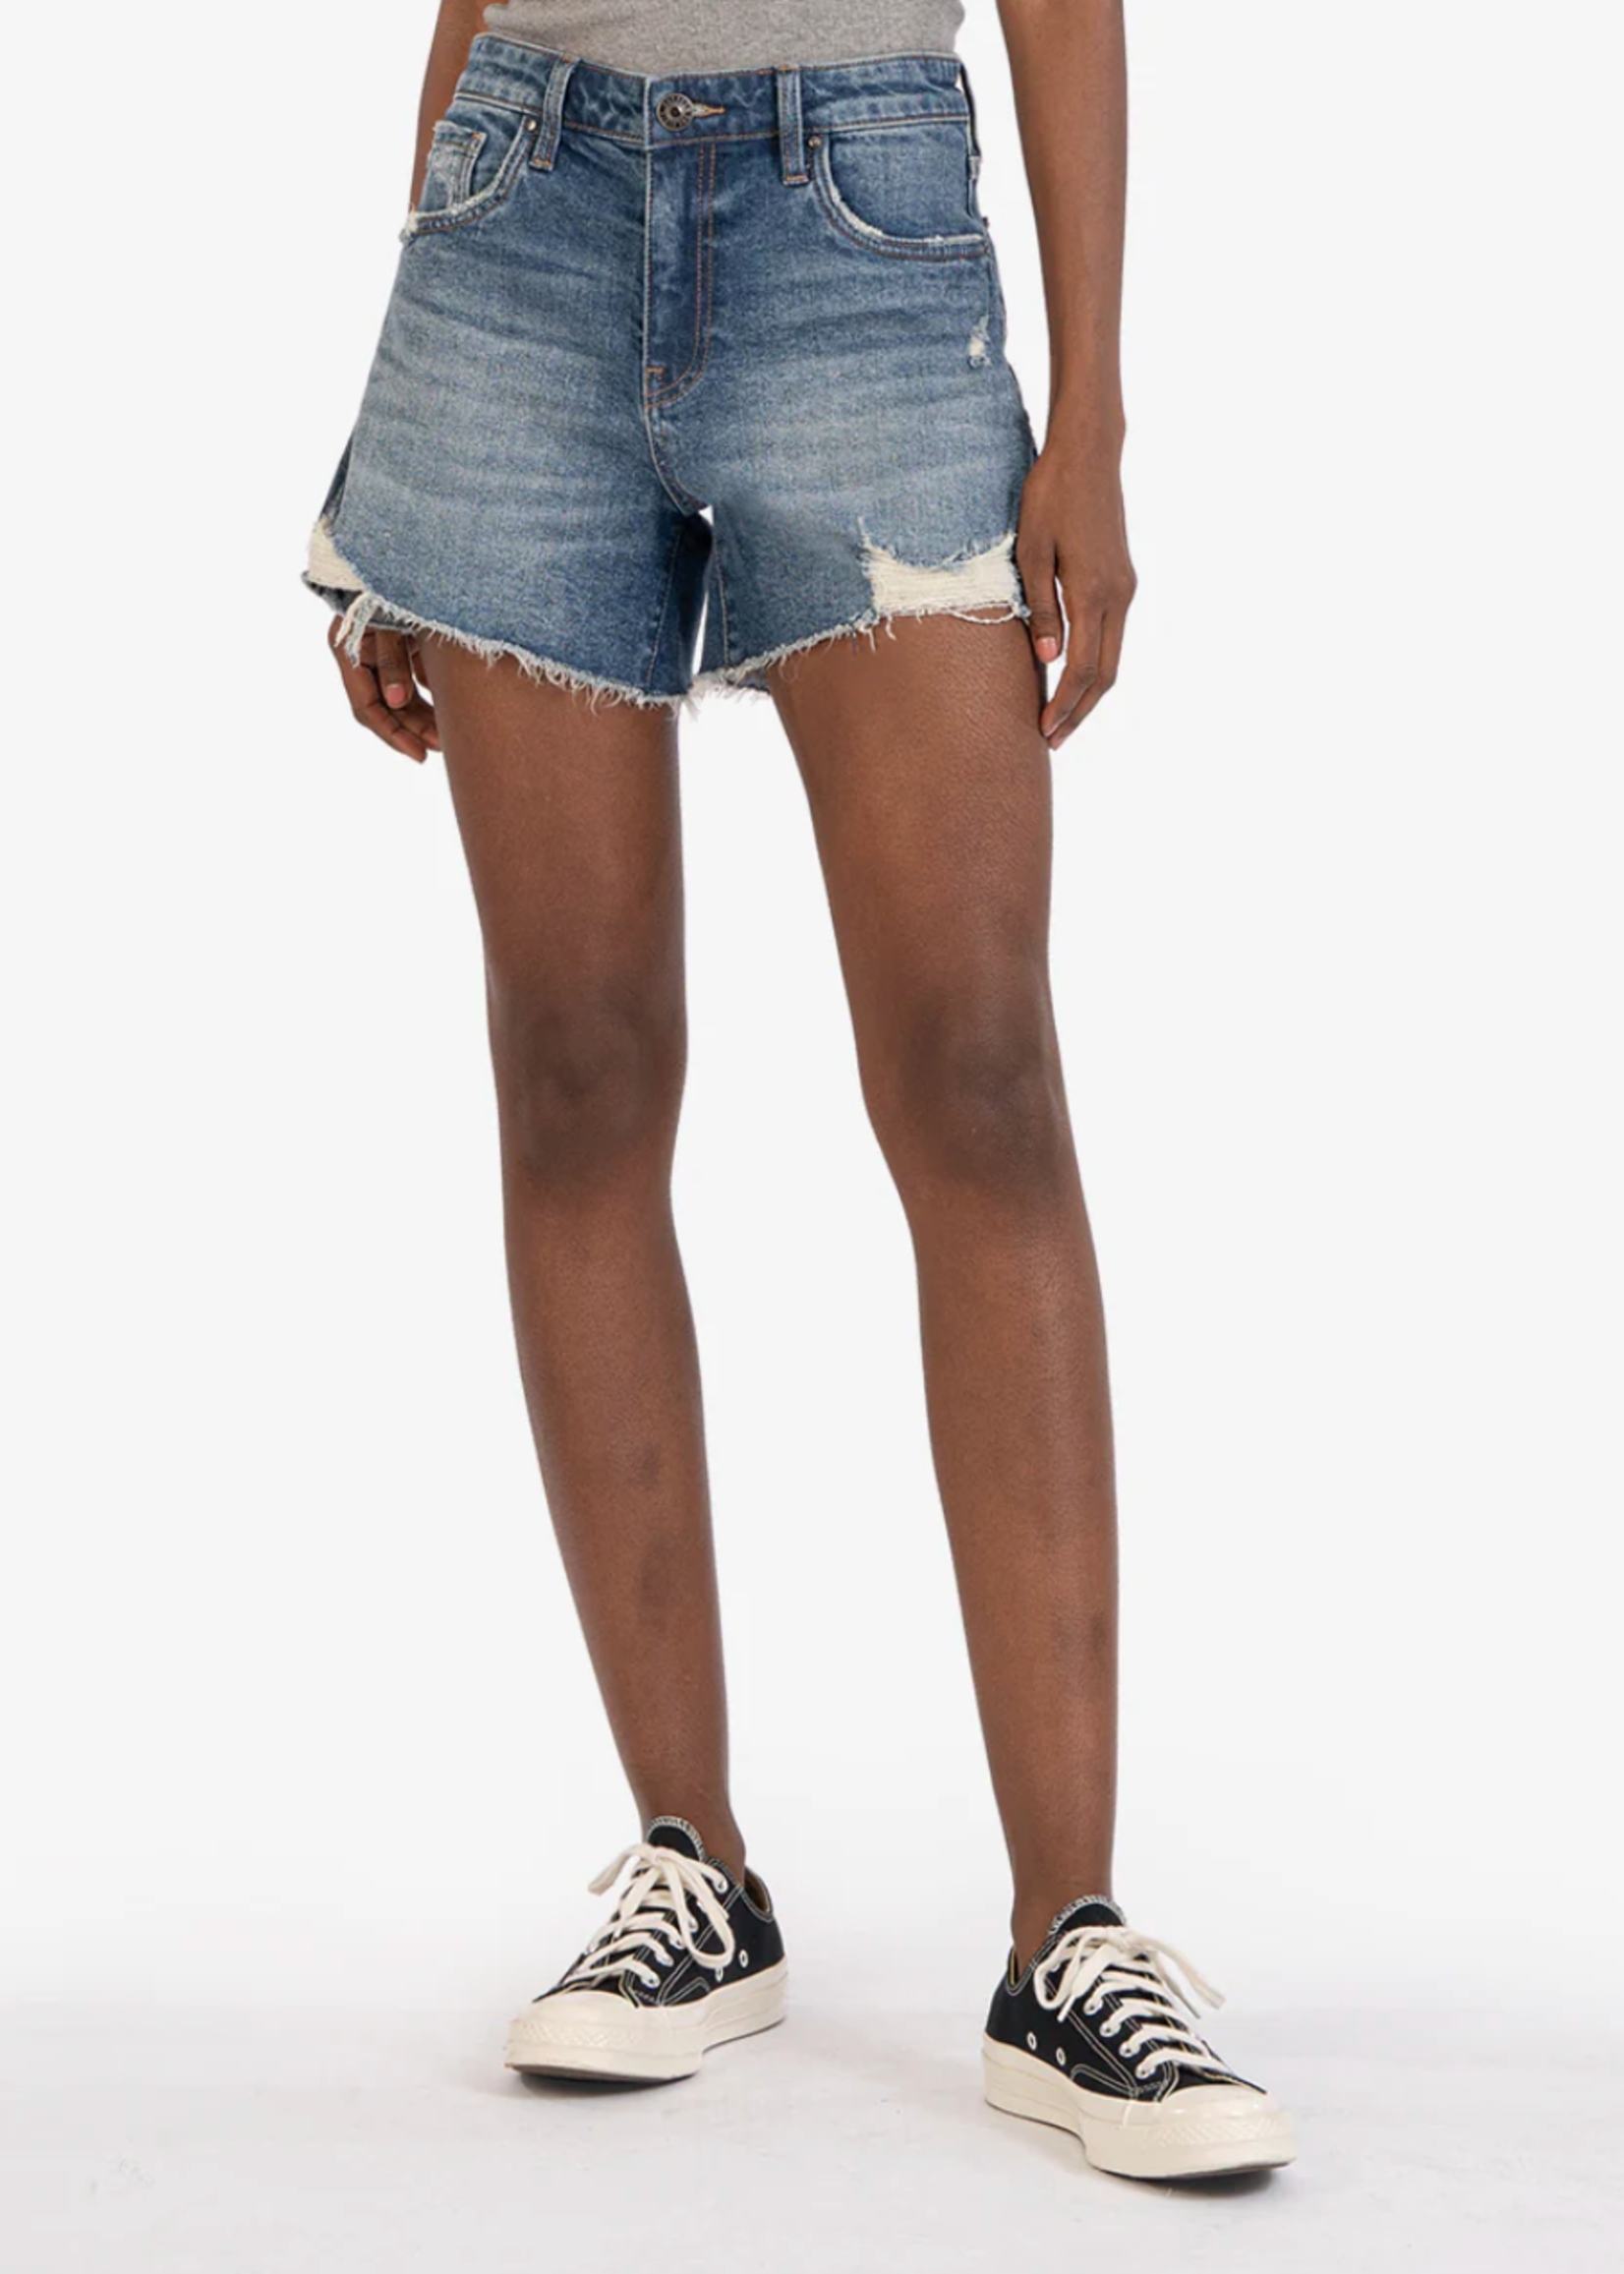 Kut from the Cloth Jane High Rise Long Short in Companion Wash